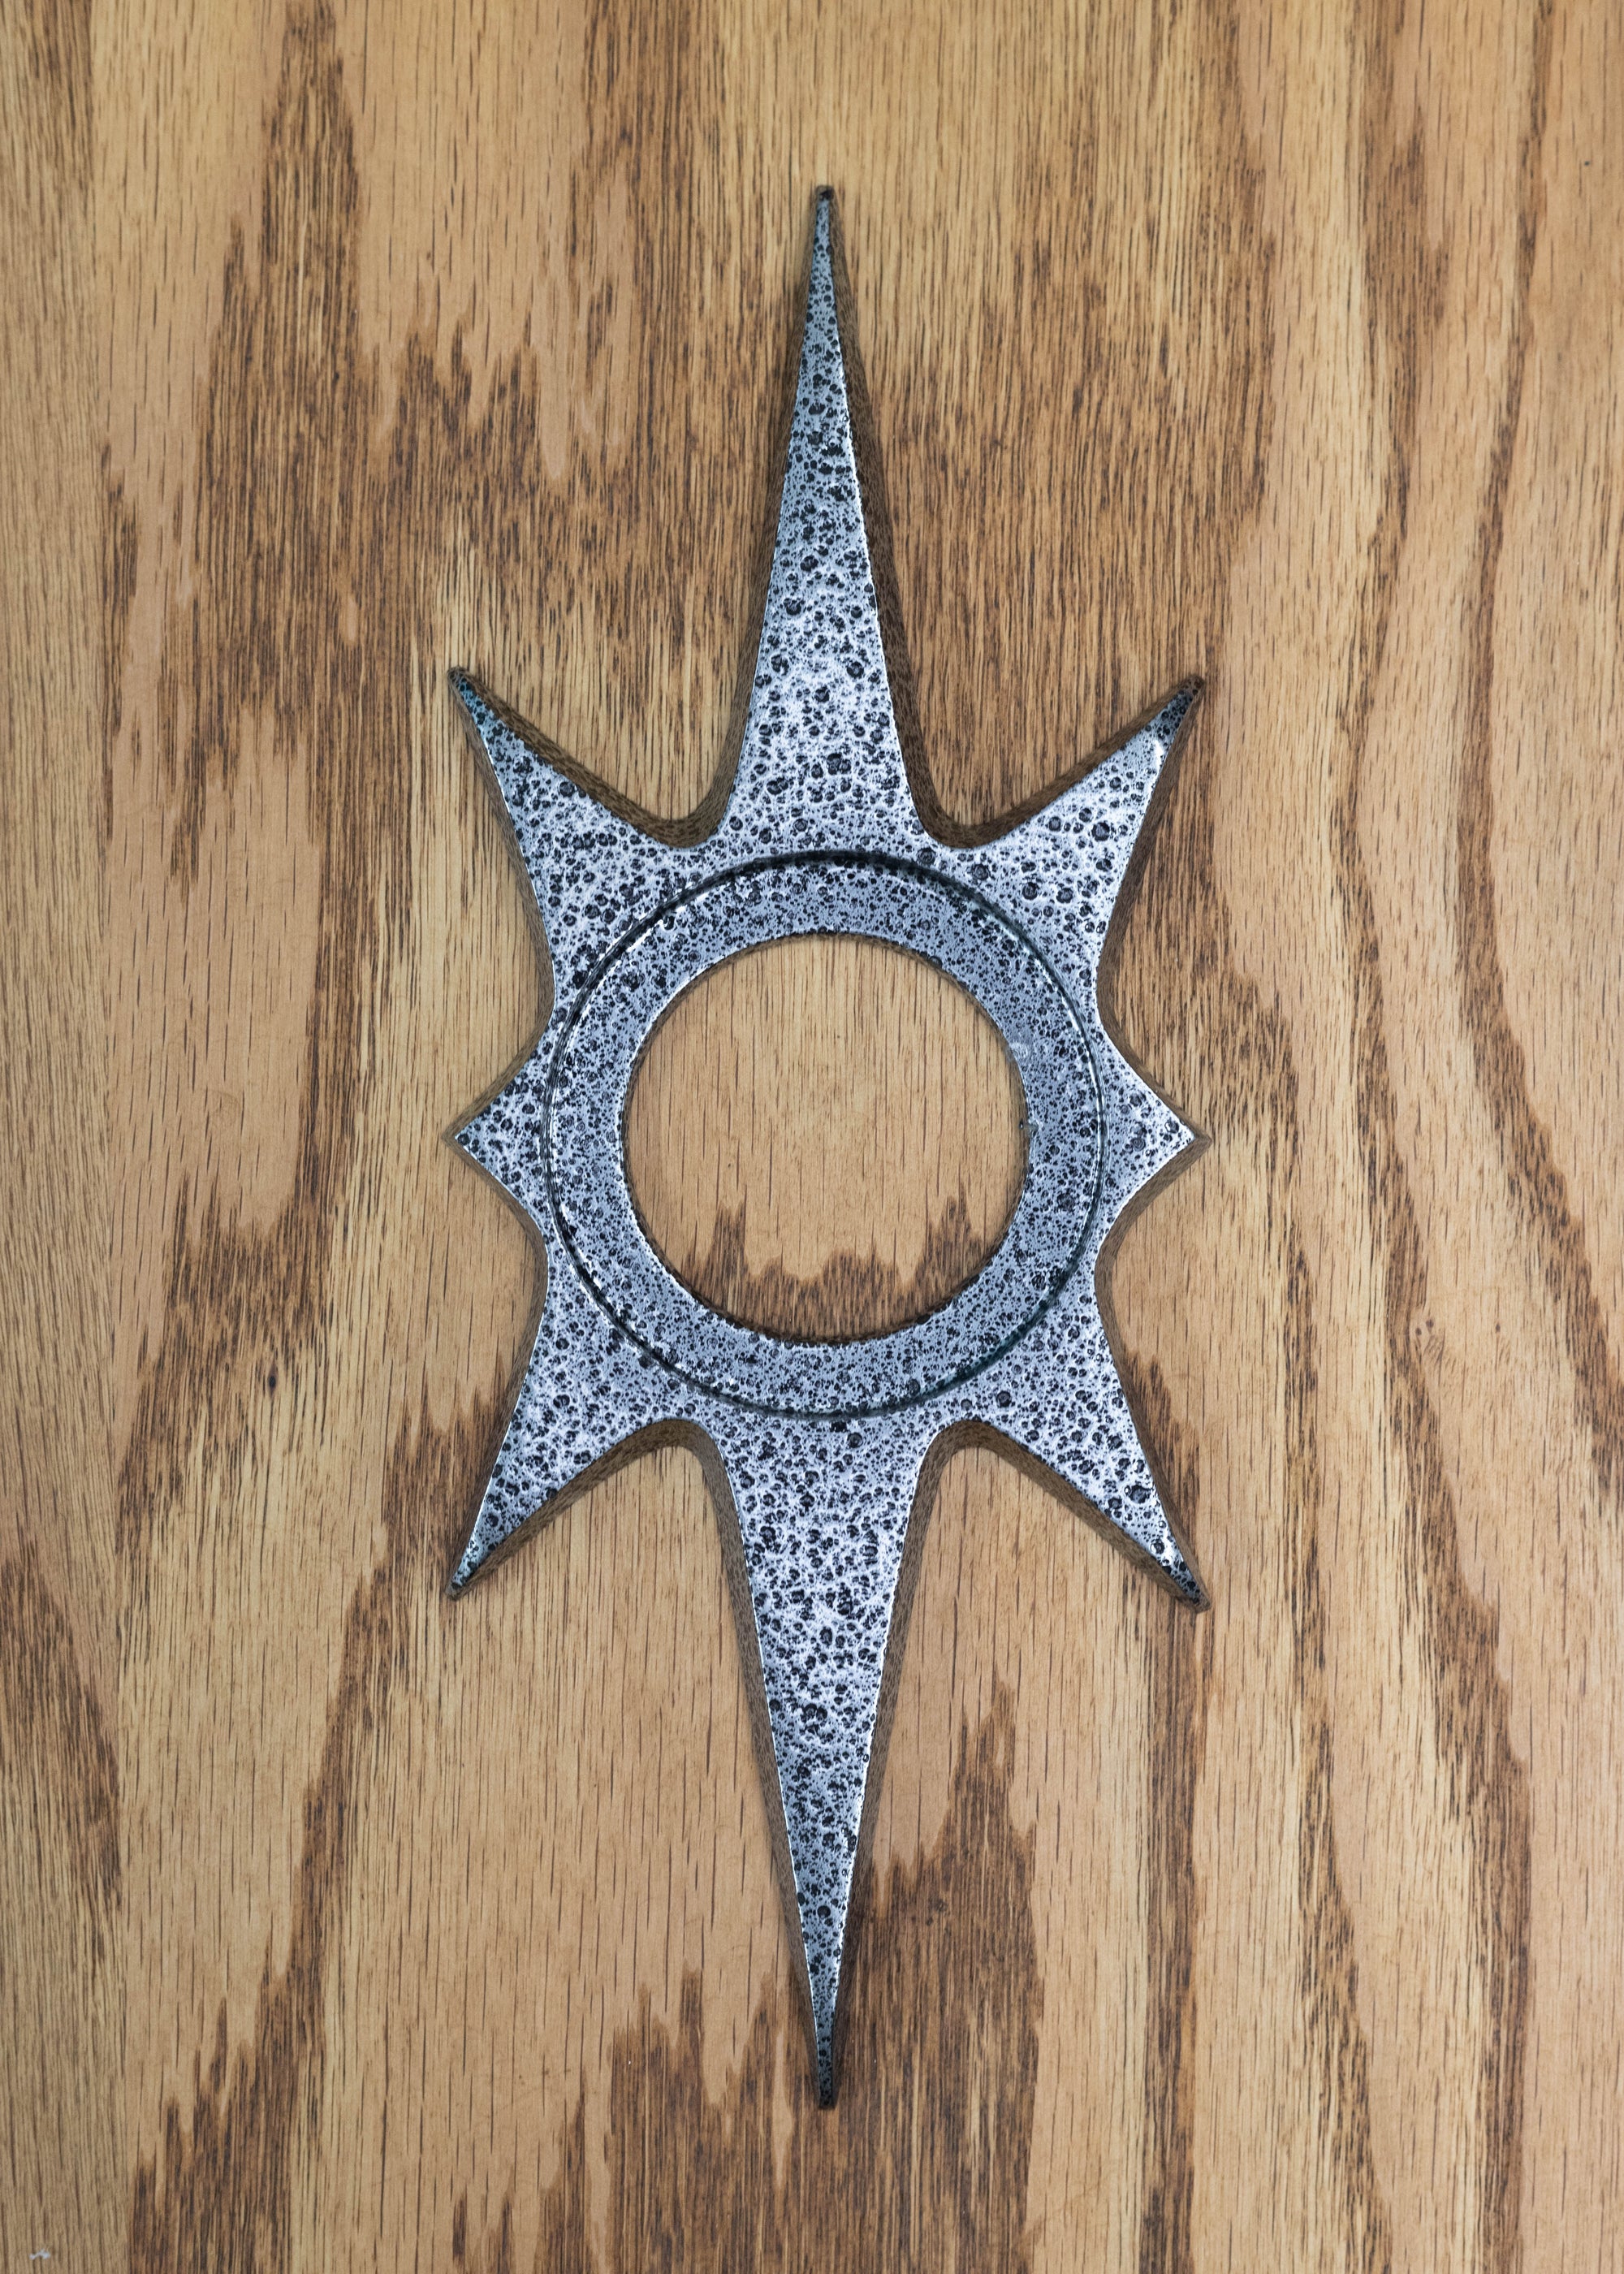 A starburst doorknob escutcheon (backing plate that goes behind.around your doorknob). There is an inset circle in the middle were the doorknob would sit into.It is a dark silver, almost gunmetal color with a porous/pitted texture that is black. The starburst consists of two long points on top and bottom, 2 very short points horizontal, and 4 medium points diagonal.